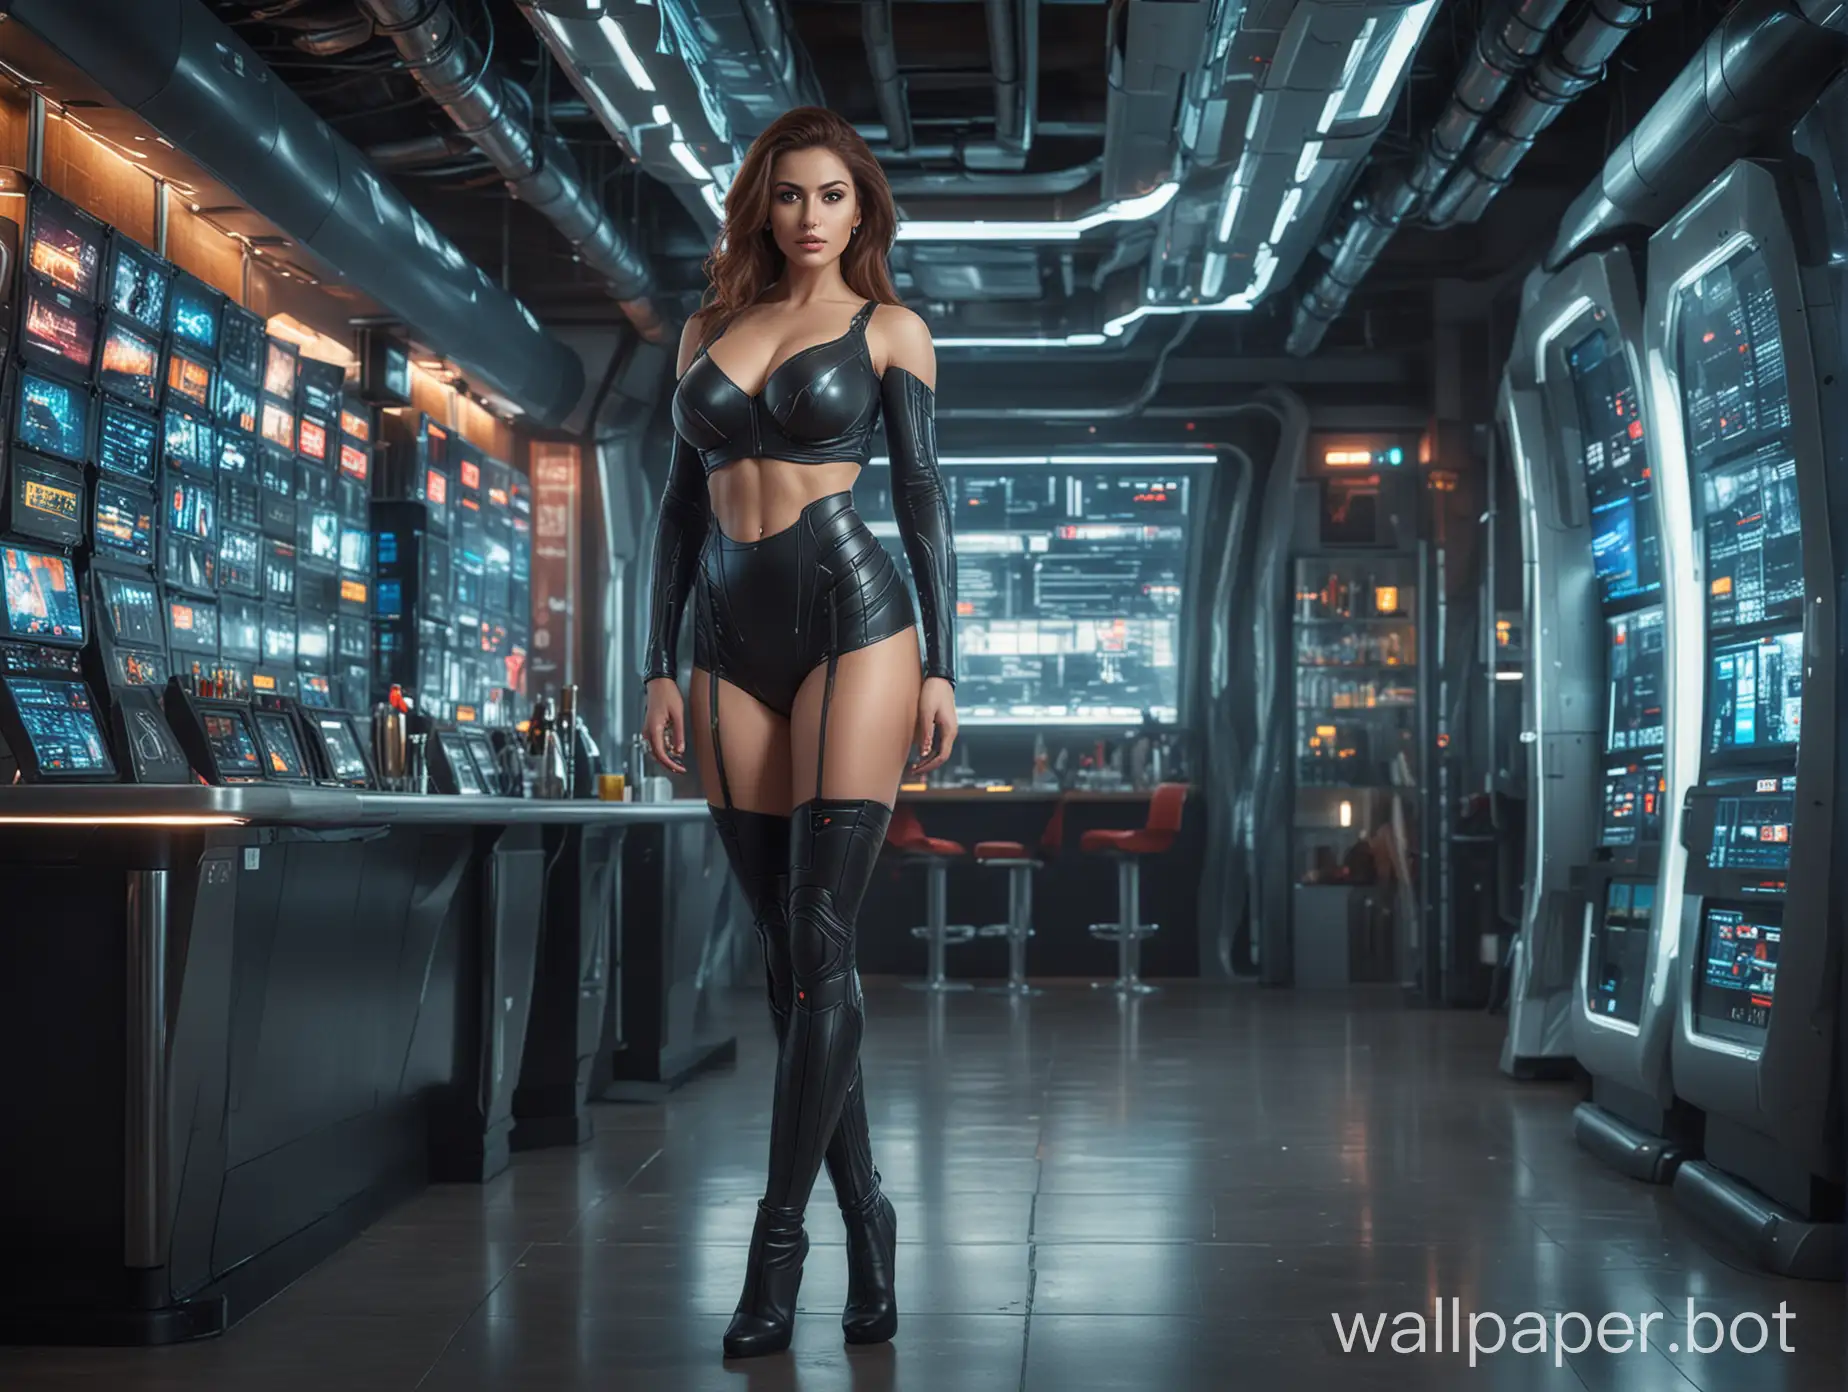 Futuristic-Businesswoman-with-Enhanced-Physique-in-HighTech-Bar